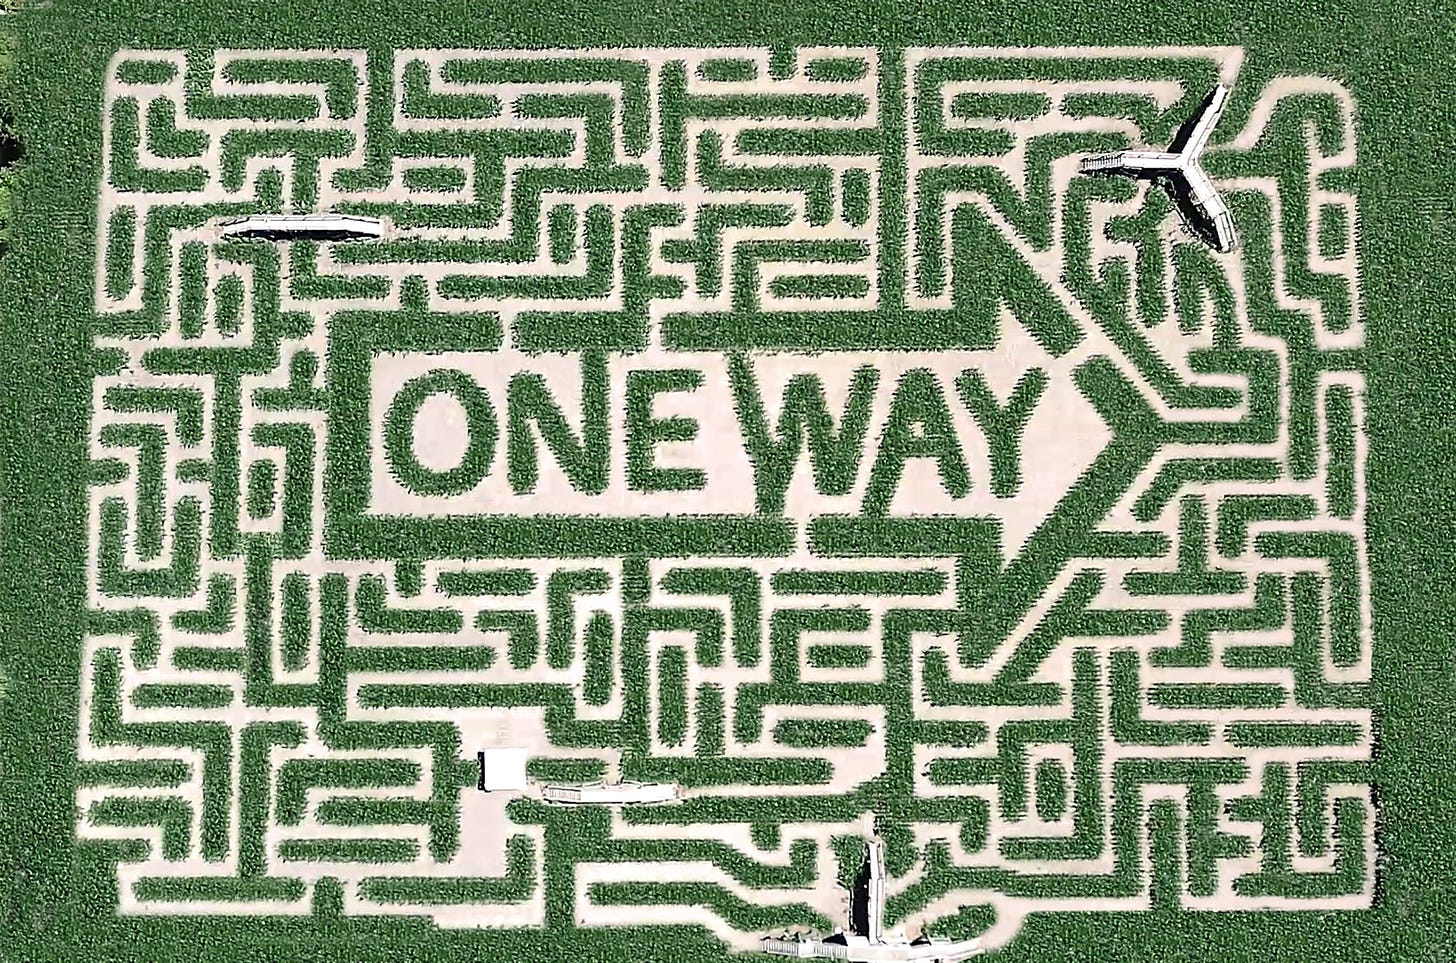 15 Coolest Corn Mazes in the U.S. to Wander Through This Fall